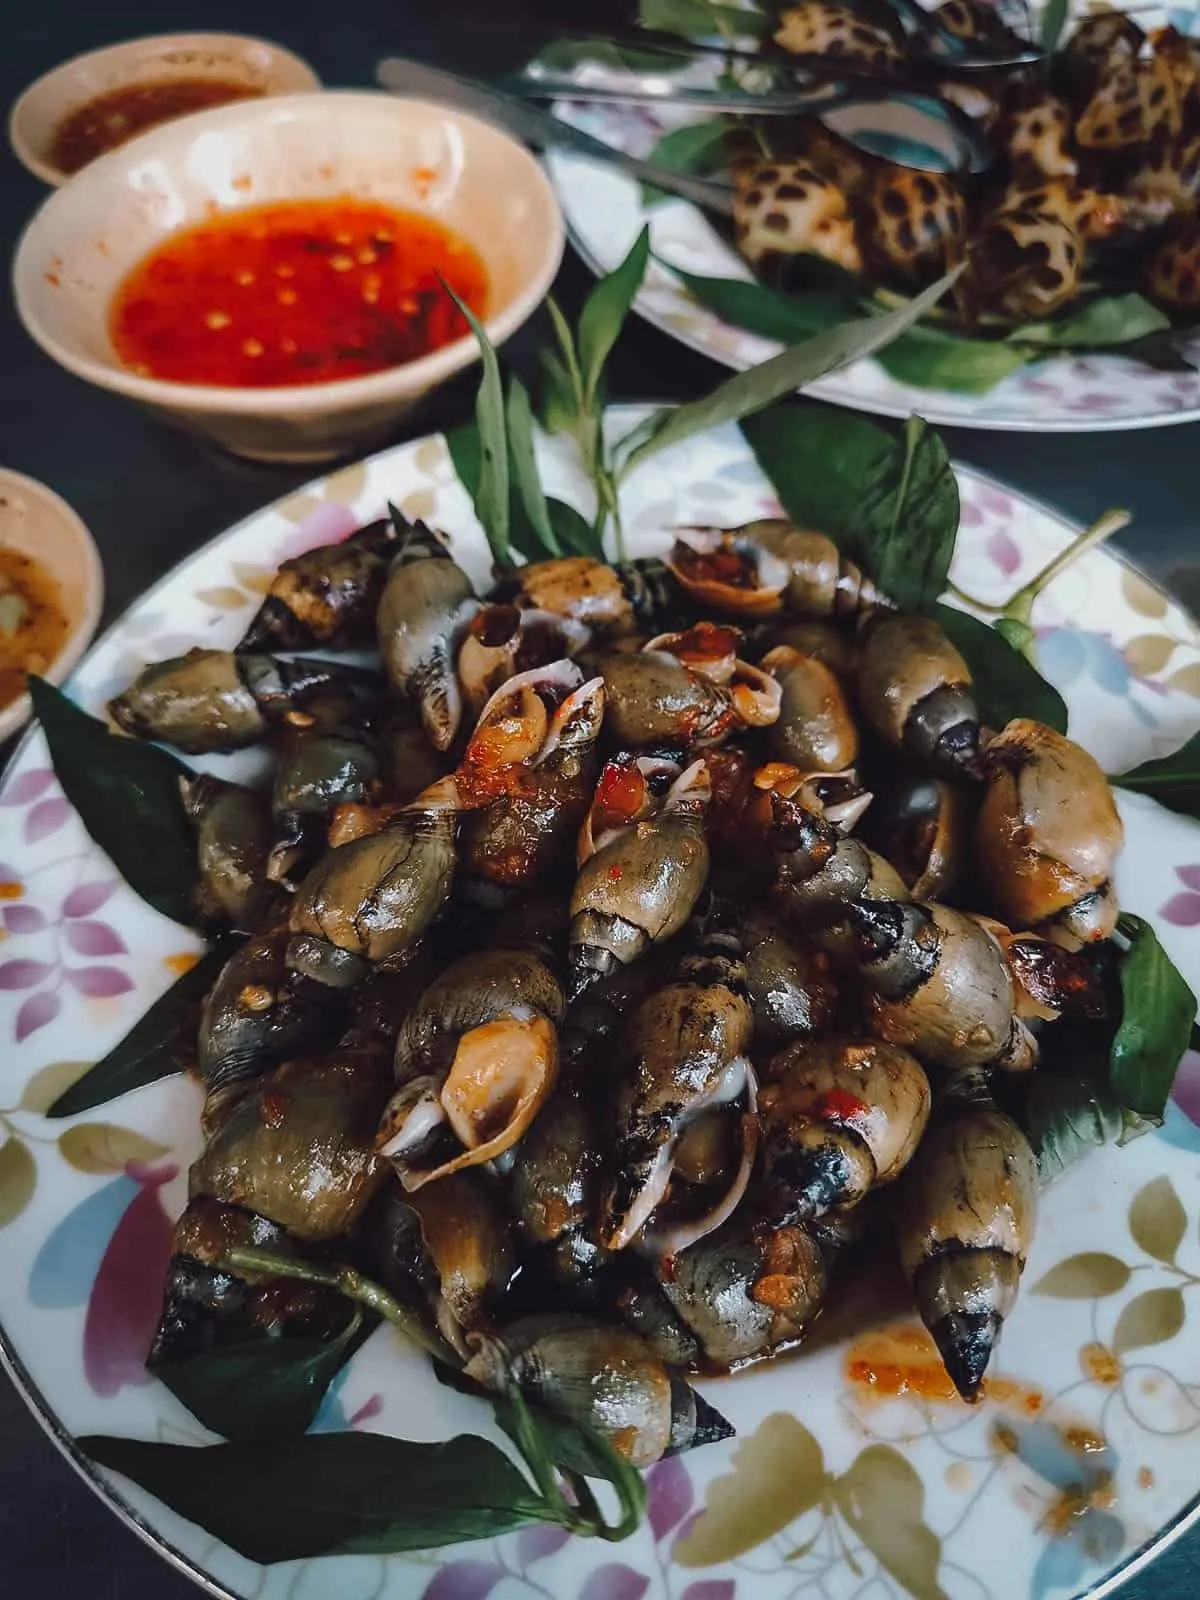 Snails in Saigon, one of the most popular street foods in southern Vietnam